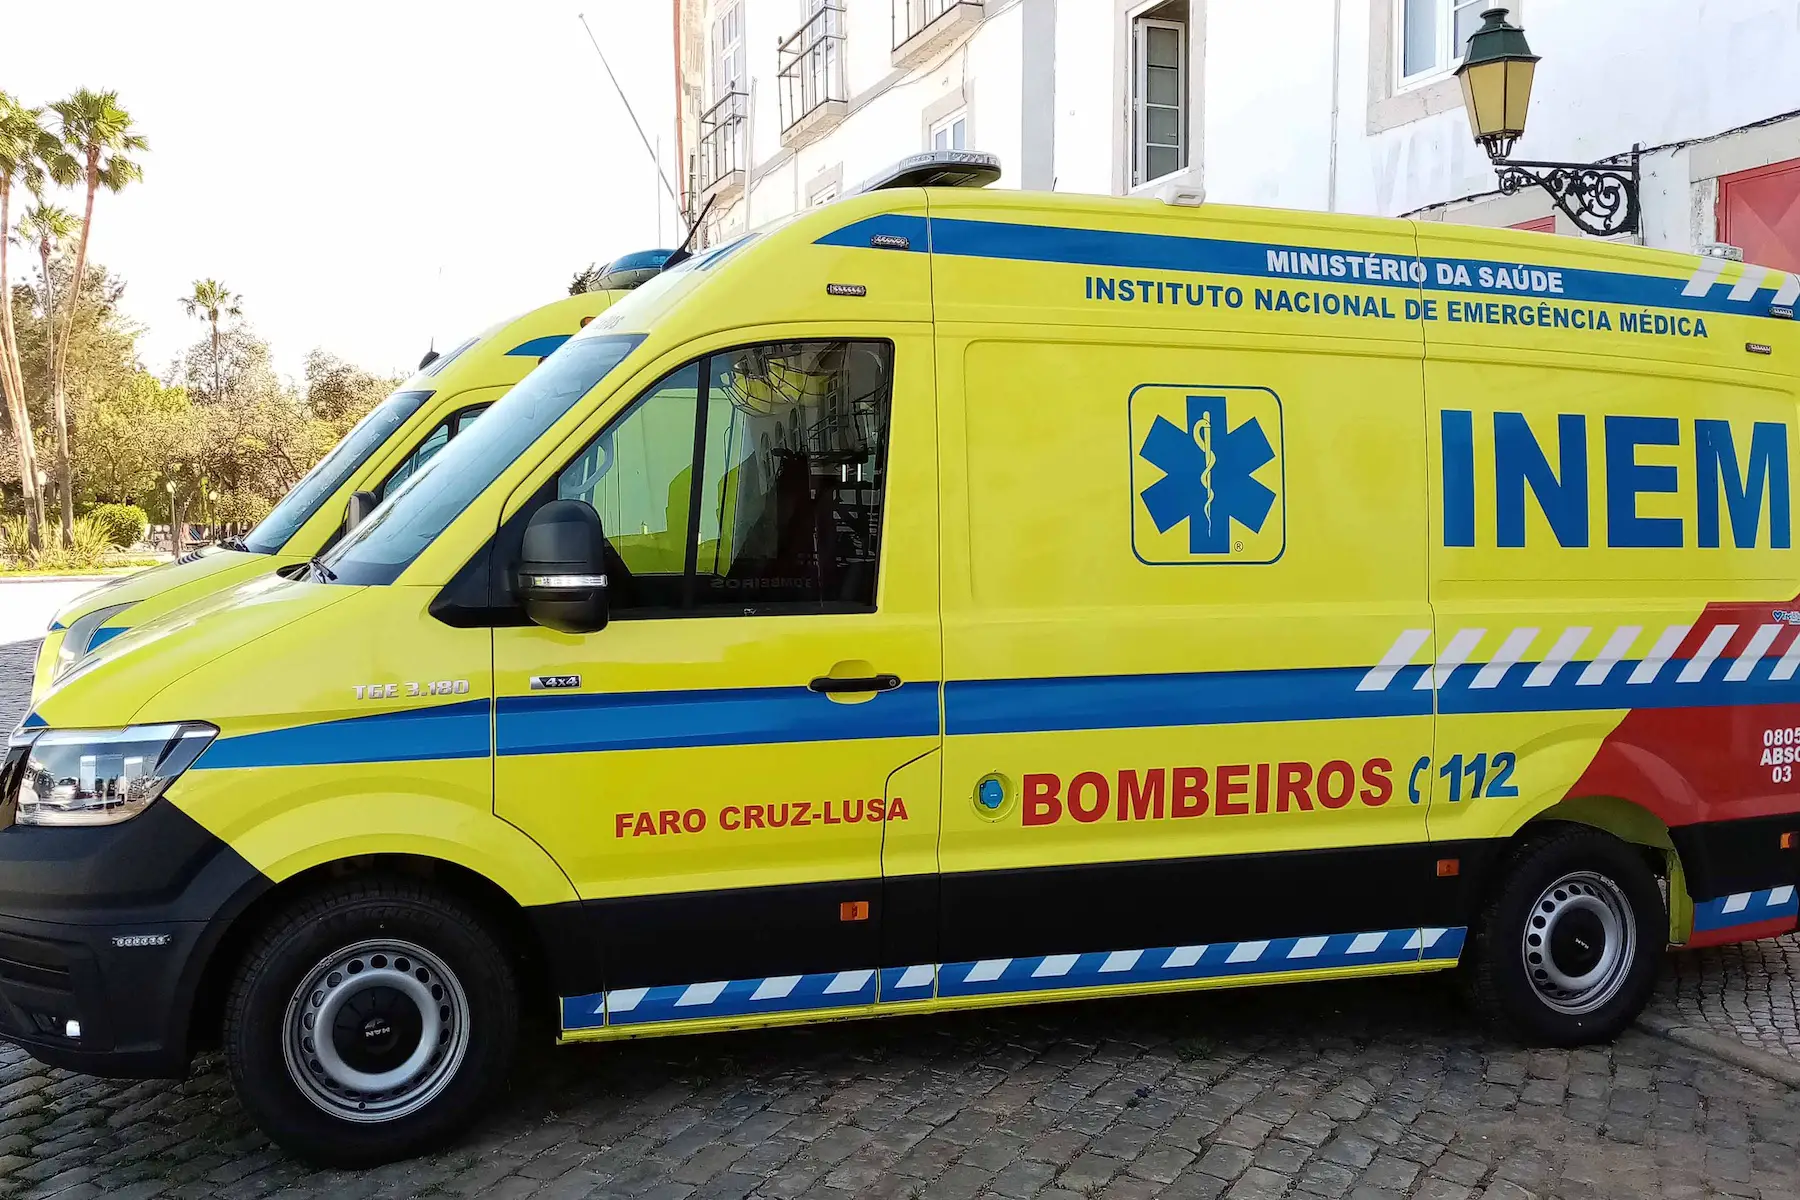 Two Portuguese ambulances marked with the emergency number and Ministério Da Saúde are parked on a street in Faro, Algarve